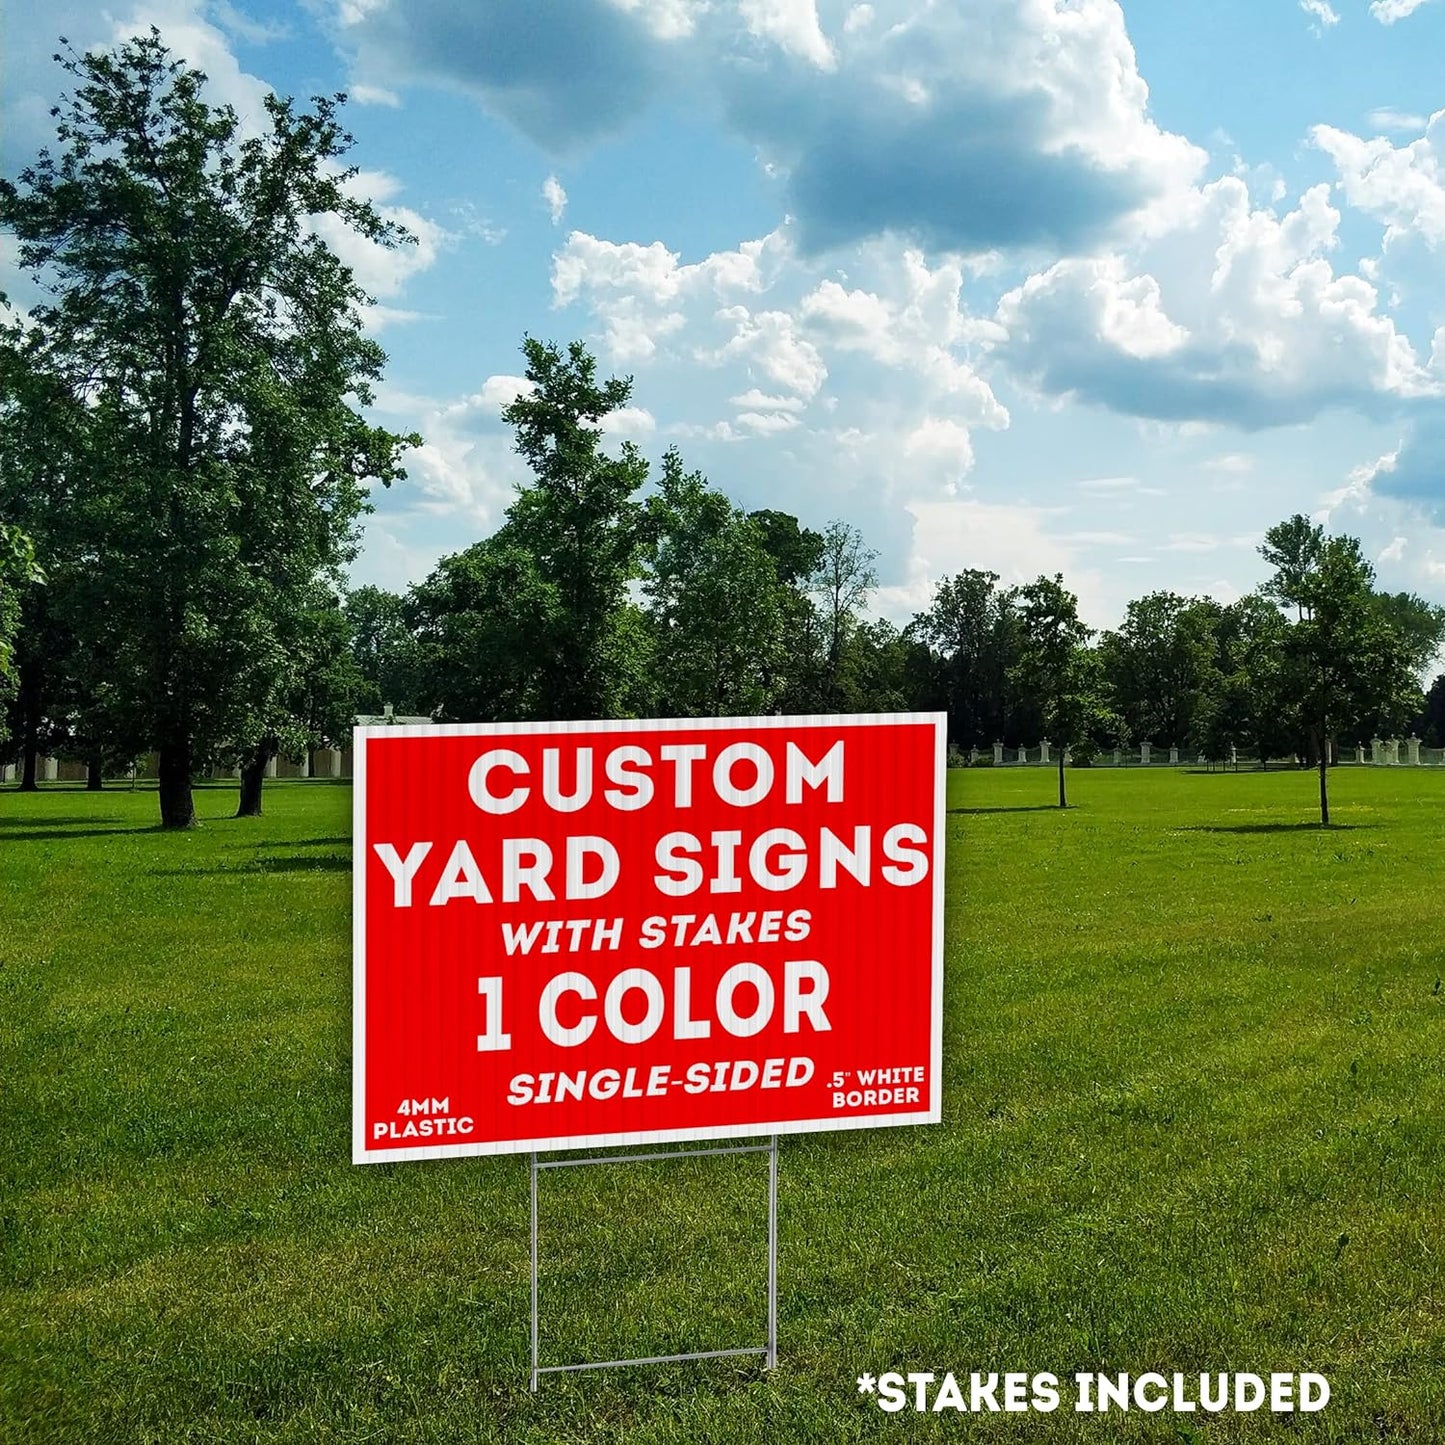 Single Sided Yard Signs Volume Discounts Available